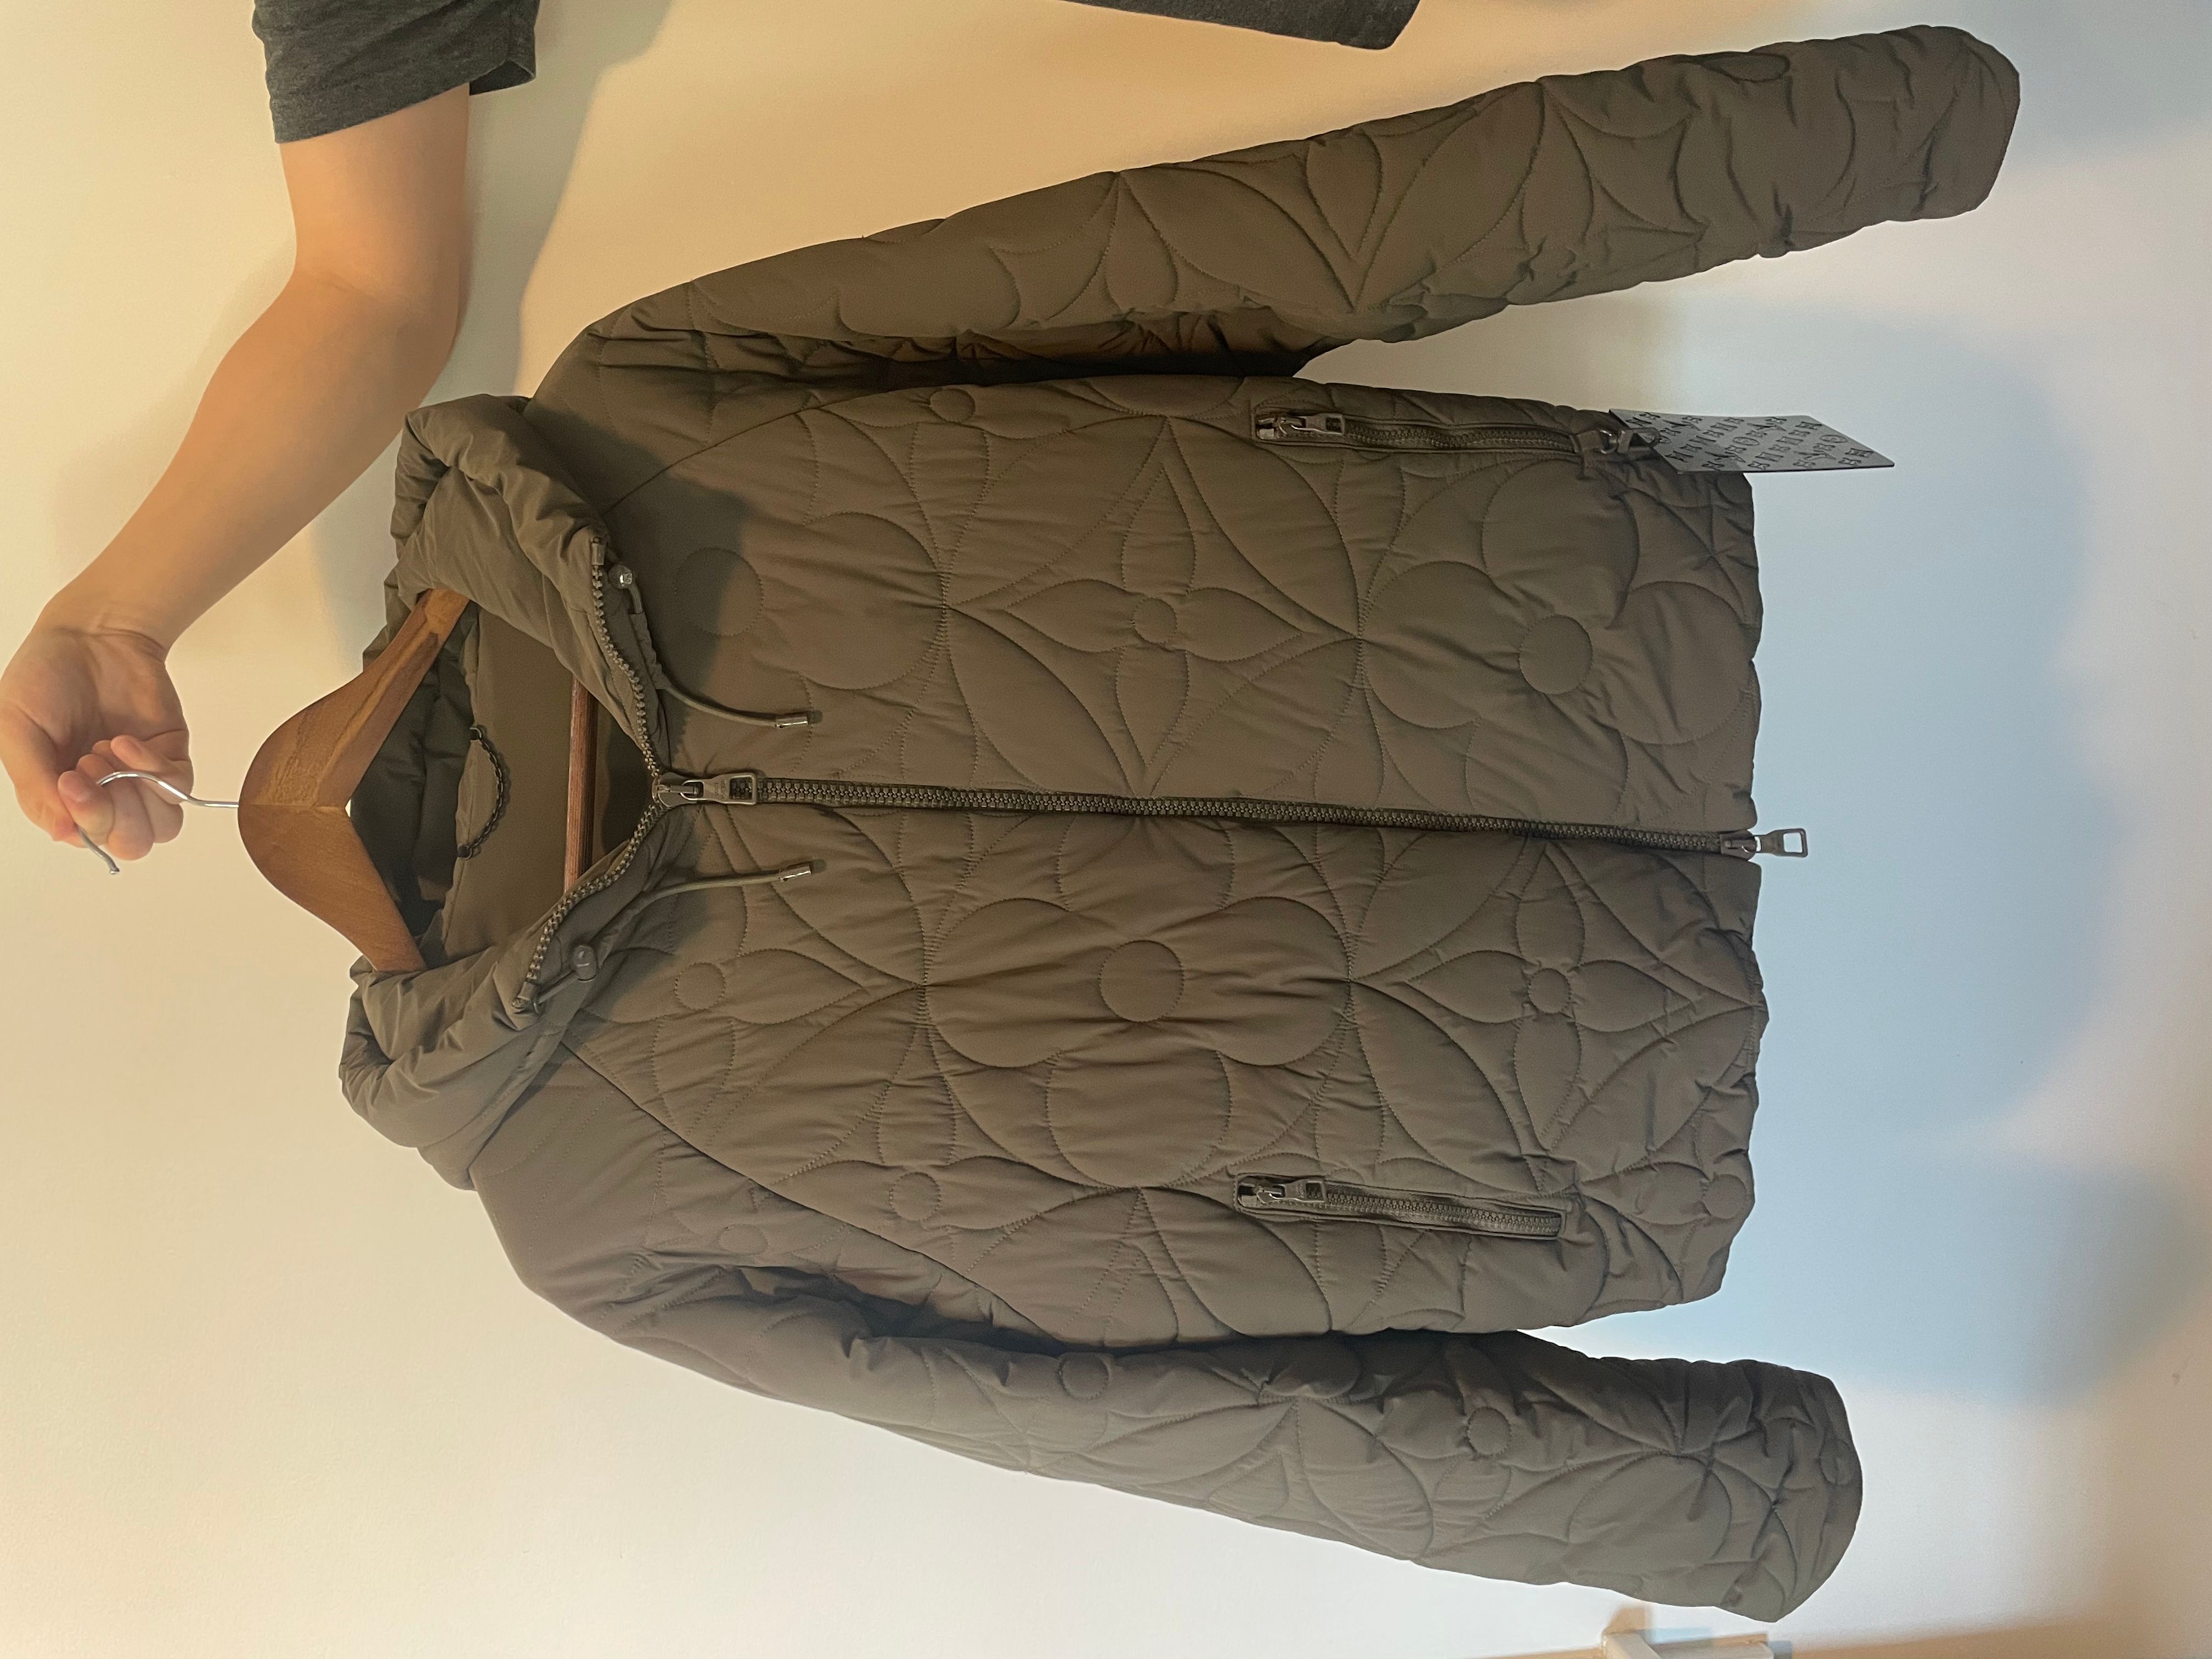 Louis Vuitton Lvse Flower Quilted Hoodie Jacket